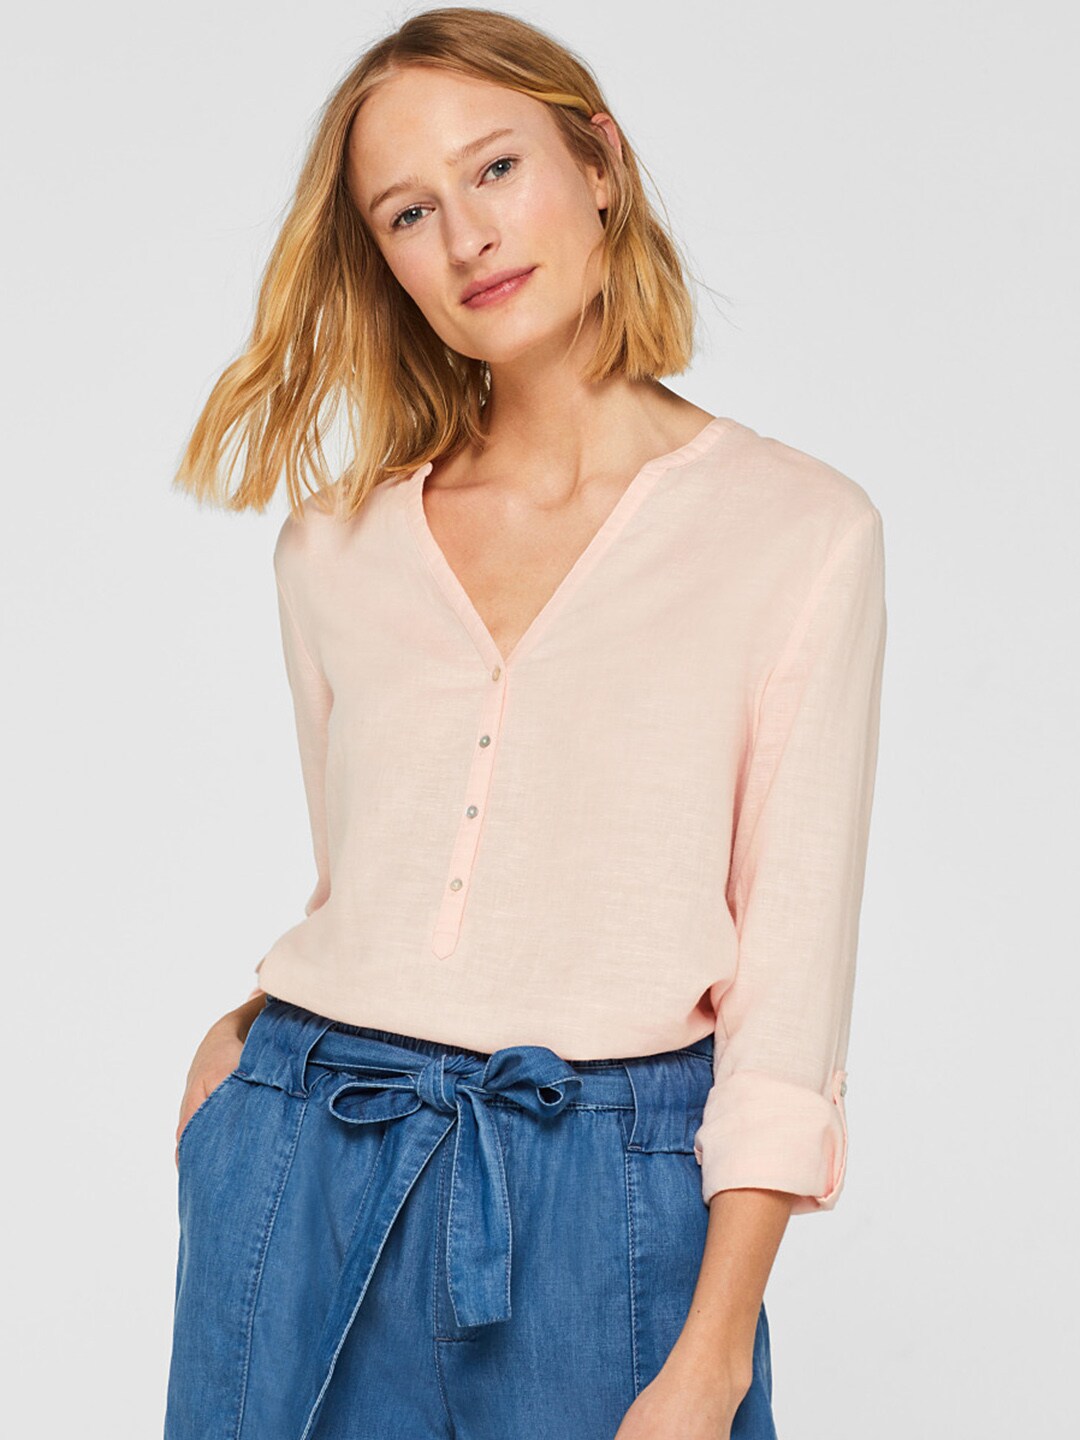 ESPRIT Women Peach-Coloured Solid Shirt Style Top Price in India